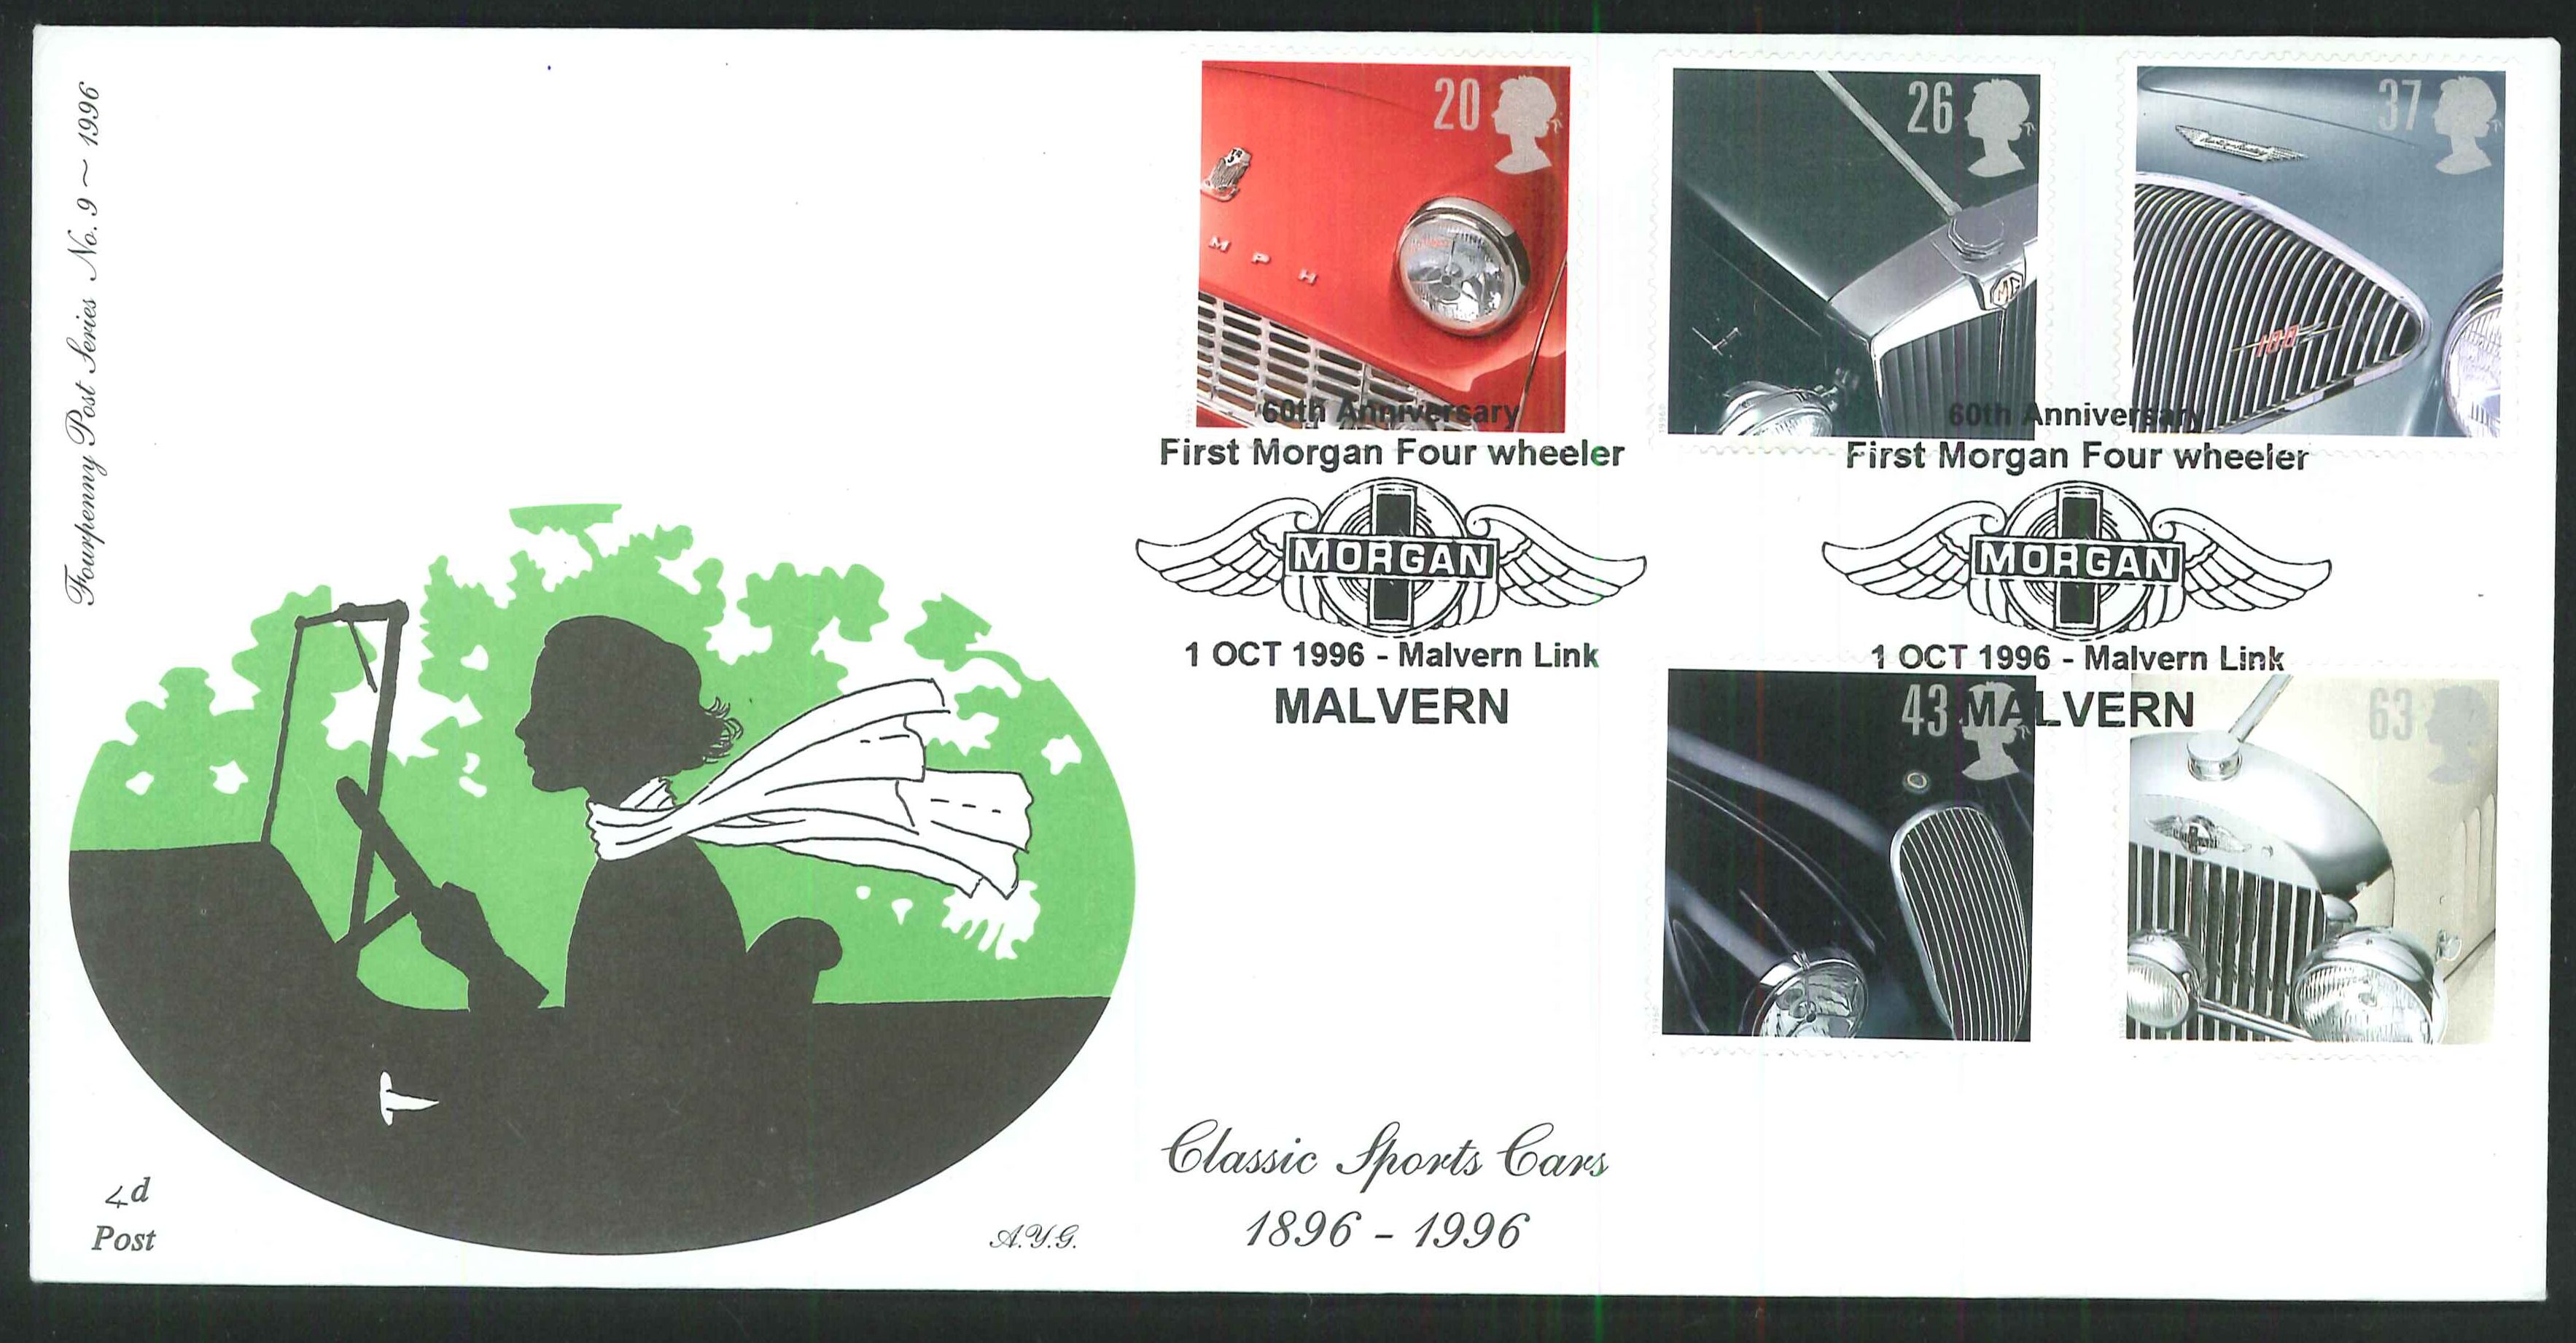 1996 - Classic Sports Cars 1896 - 1996, First Day Cover - Malvern Postmark